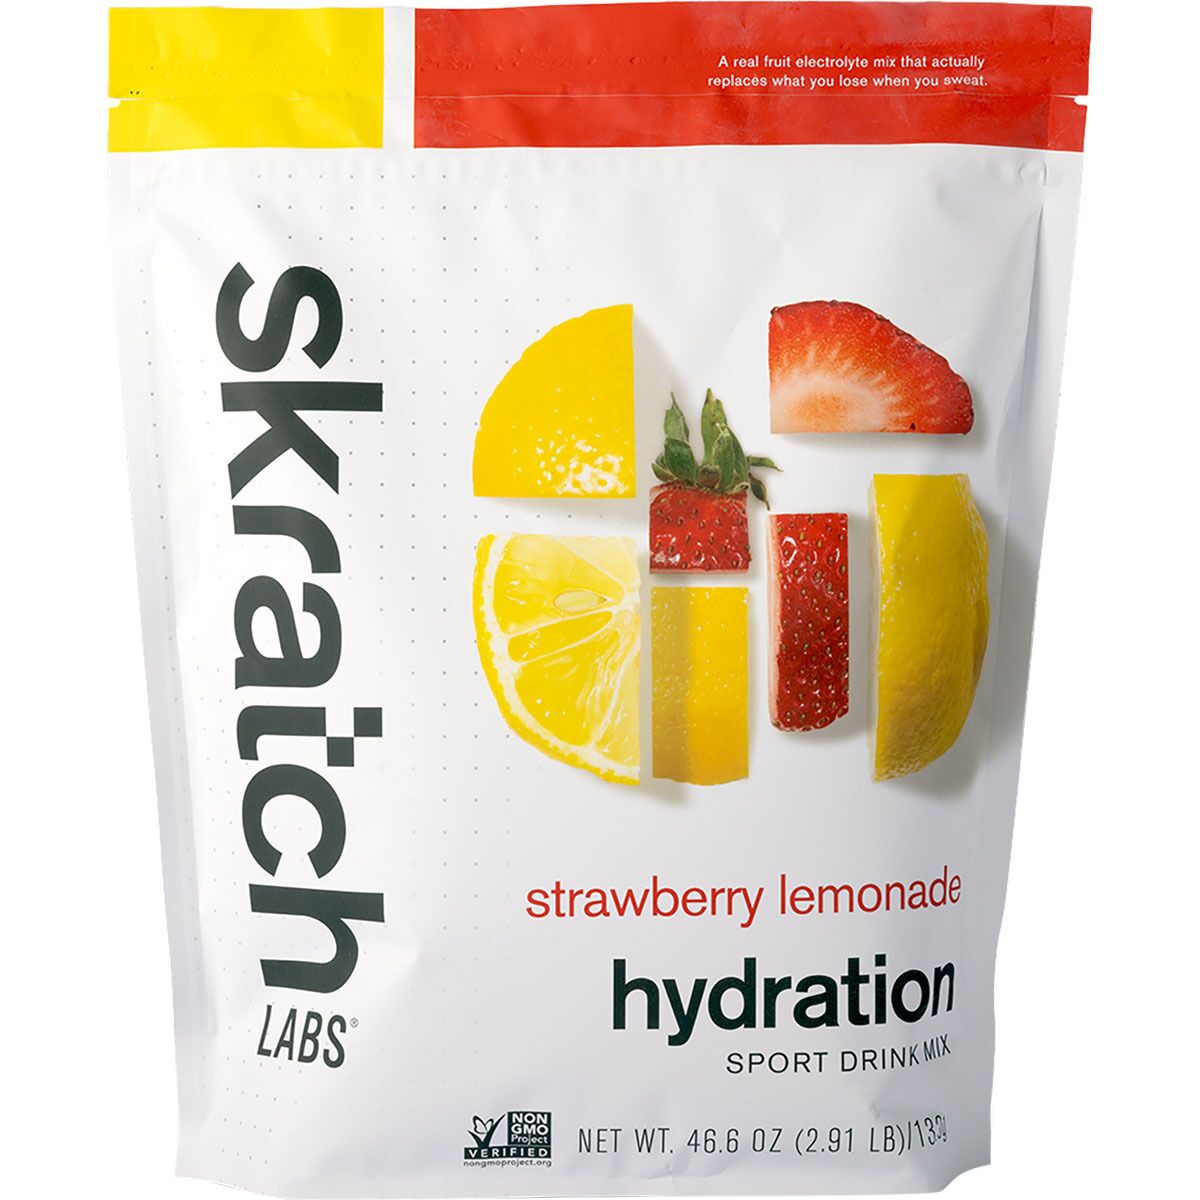 Skratch Labs Hydration Sport Drink Mix - 60-Serving Bag Strawberry Lemonade, 60-Serving Resealable Pouch